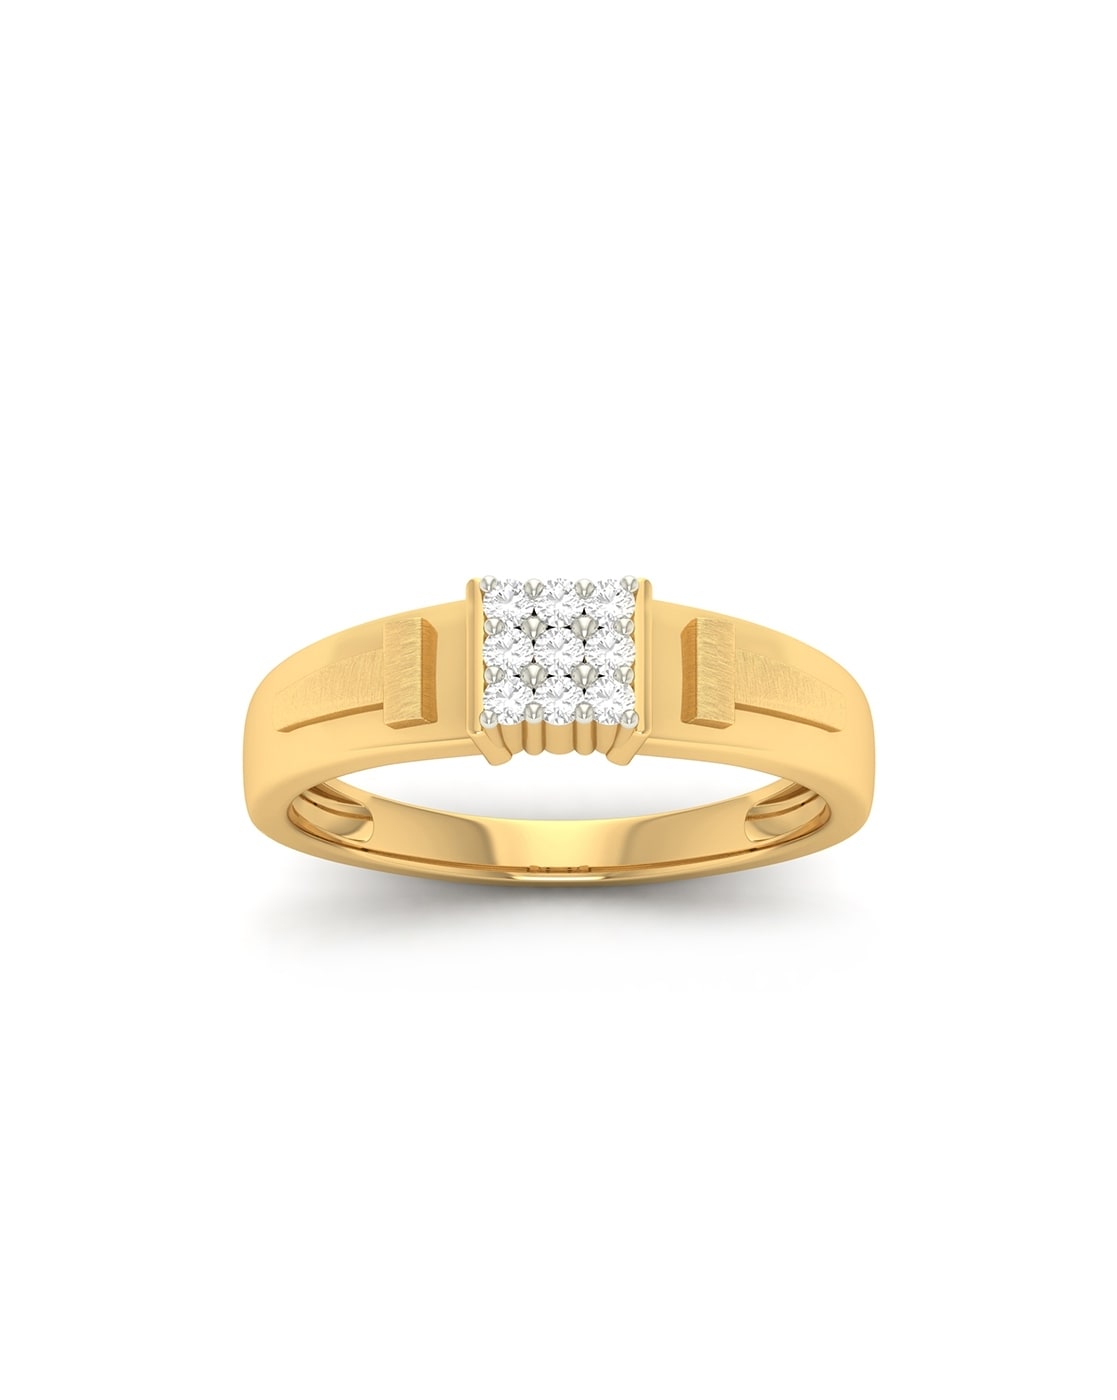 Louis Diamond Ring Online Jewellery Shopping India | Yellow Gold 14K |  Candere by Kalyan Jewellers